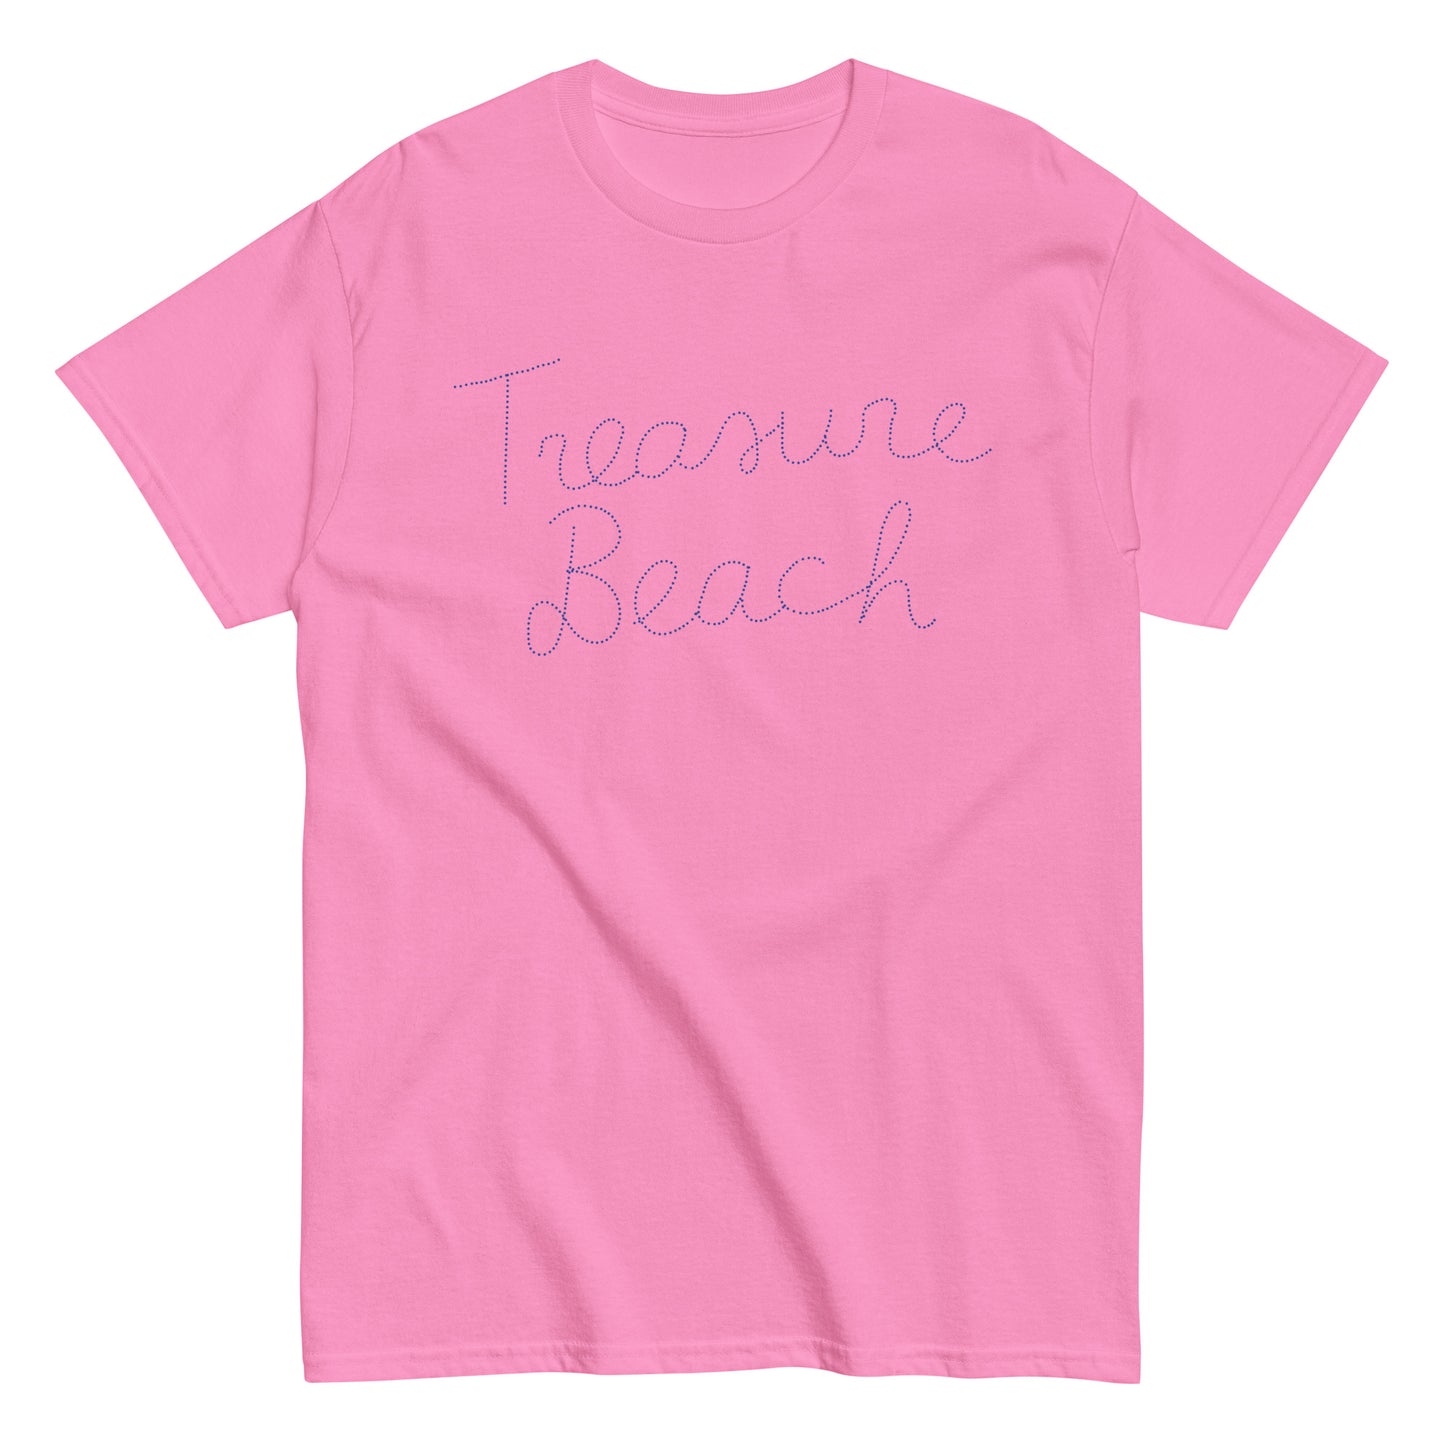 Treasure Beach Dotted Script T-Shirt in Multiple Colors